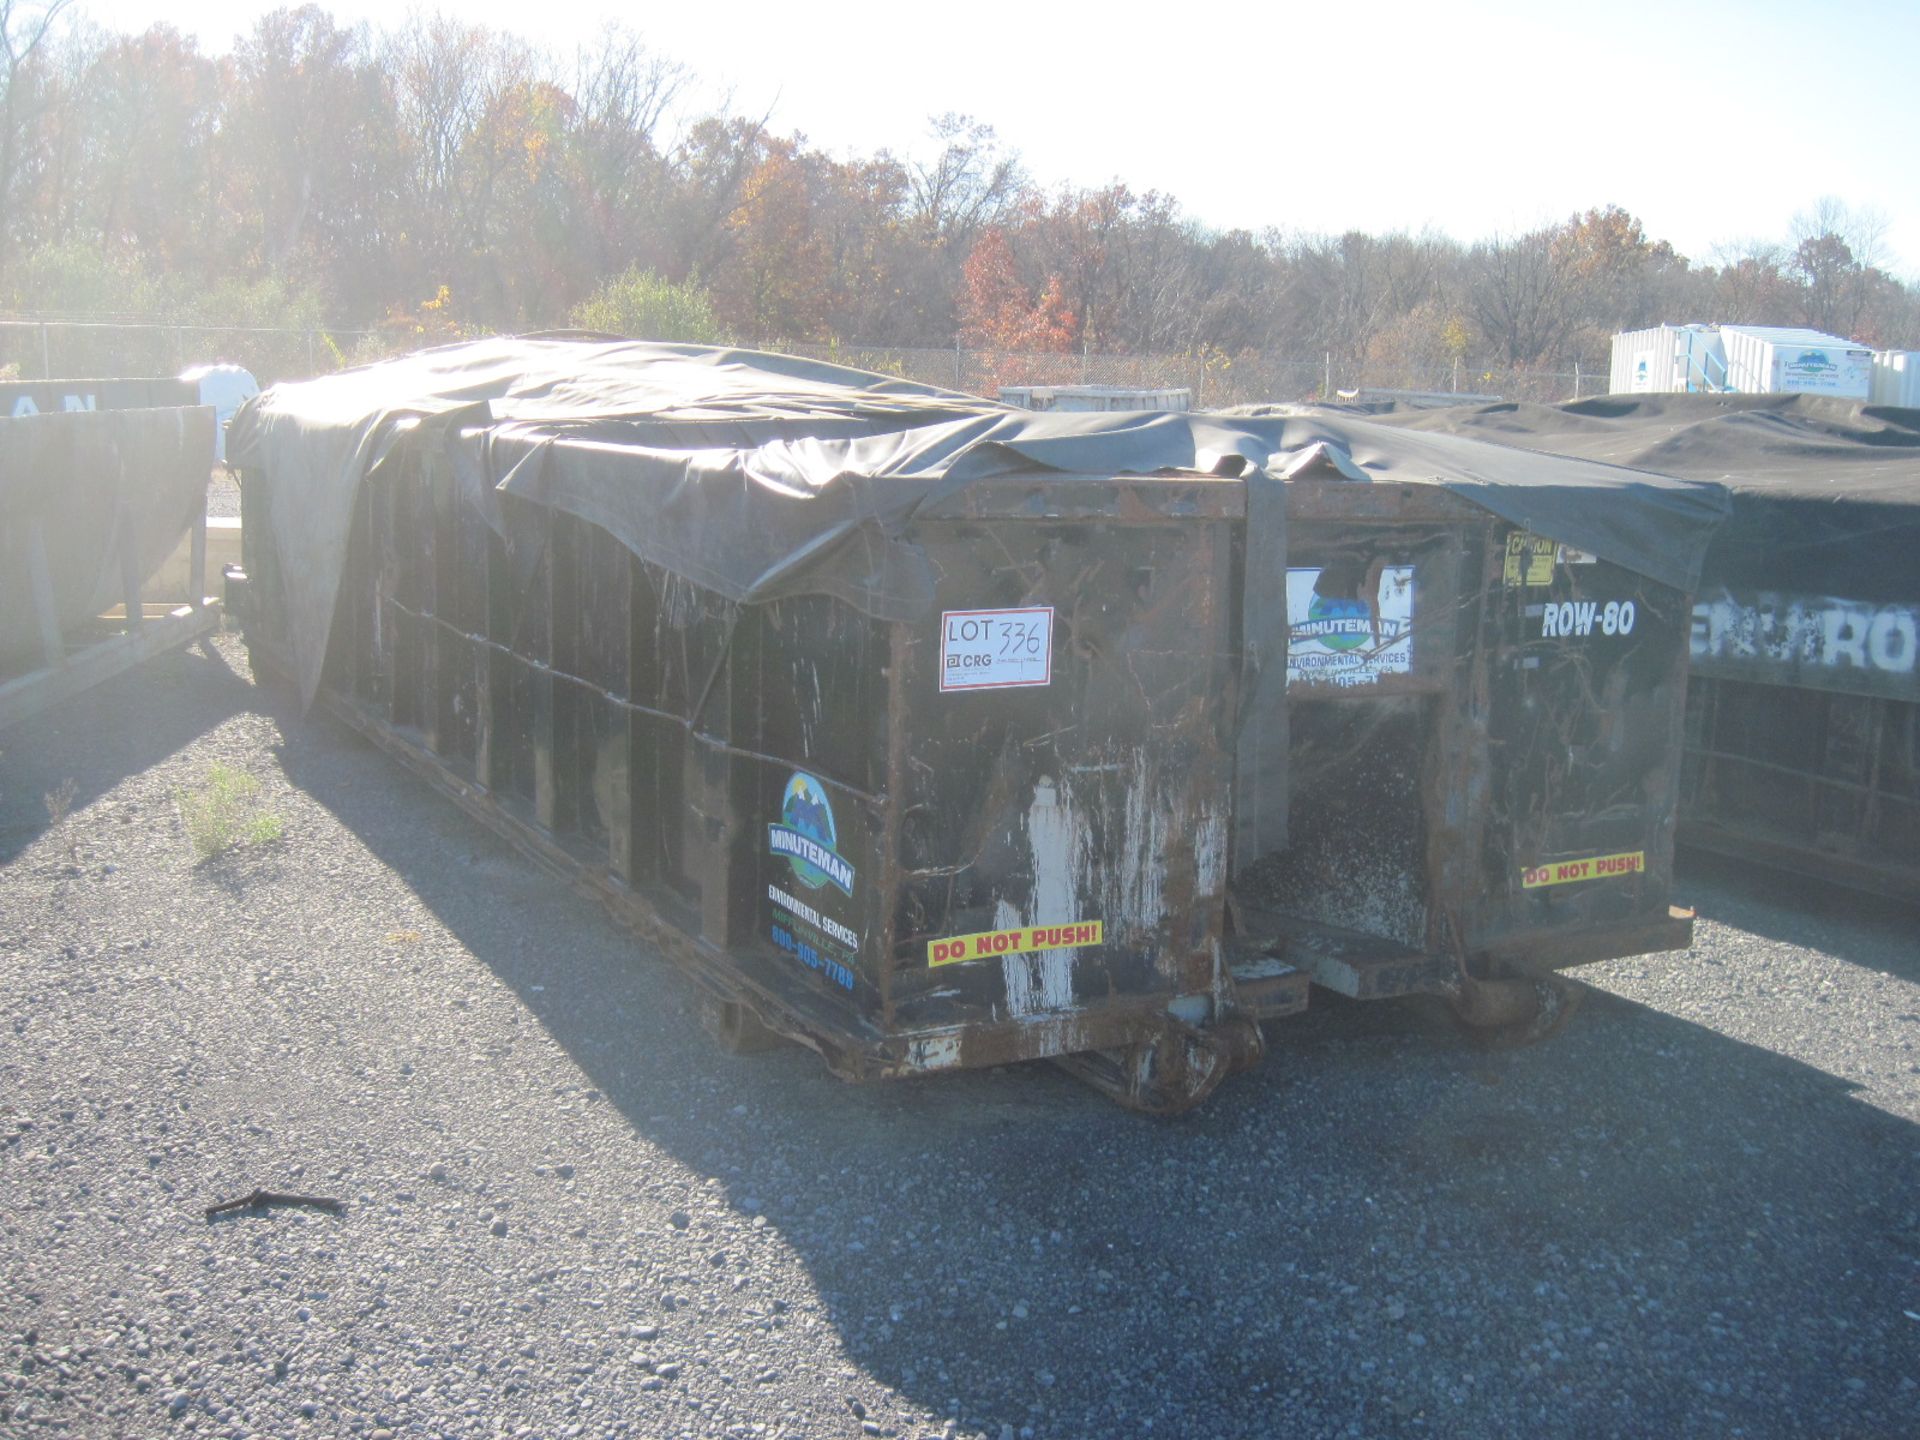 94"W X 268"L X 53"H roll-off container, 20 Yard capacity (Unit ROW80)